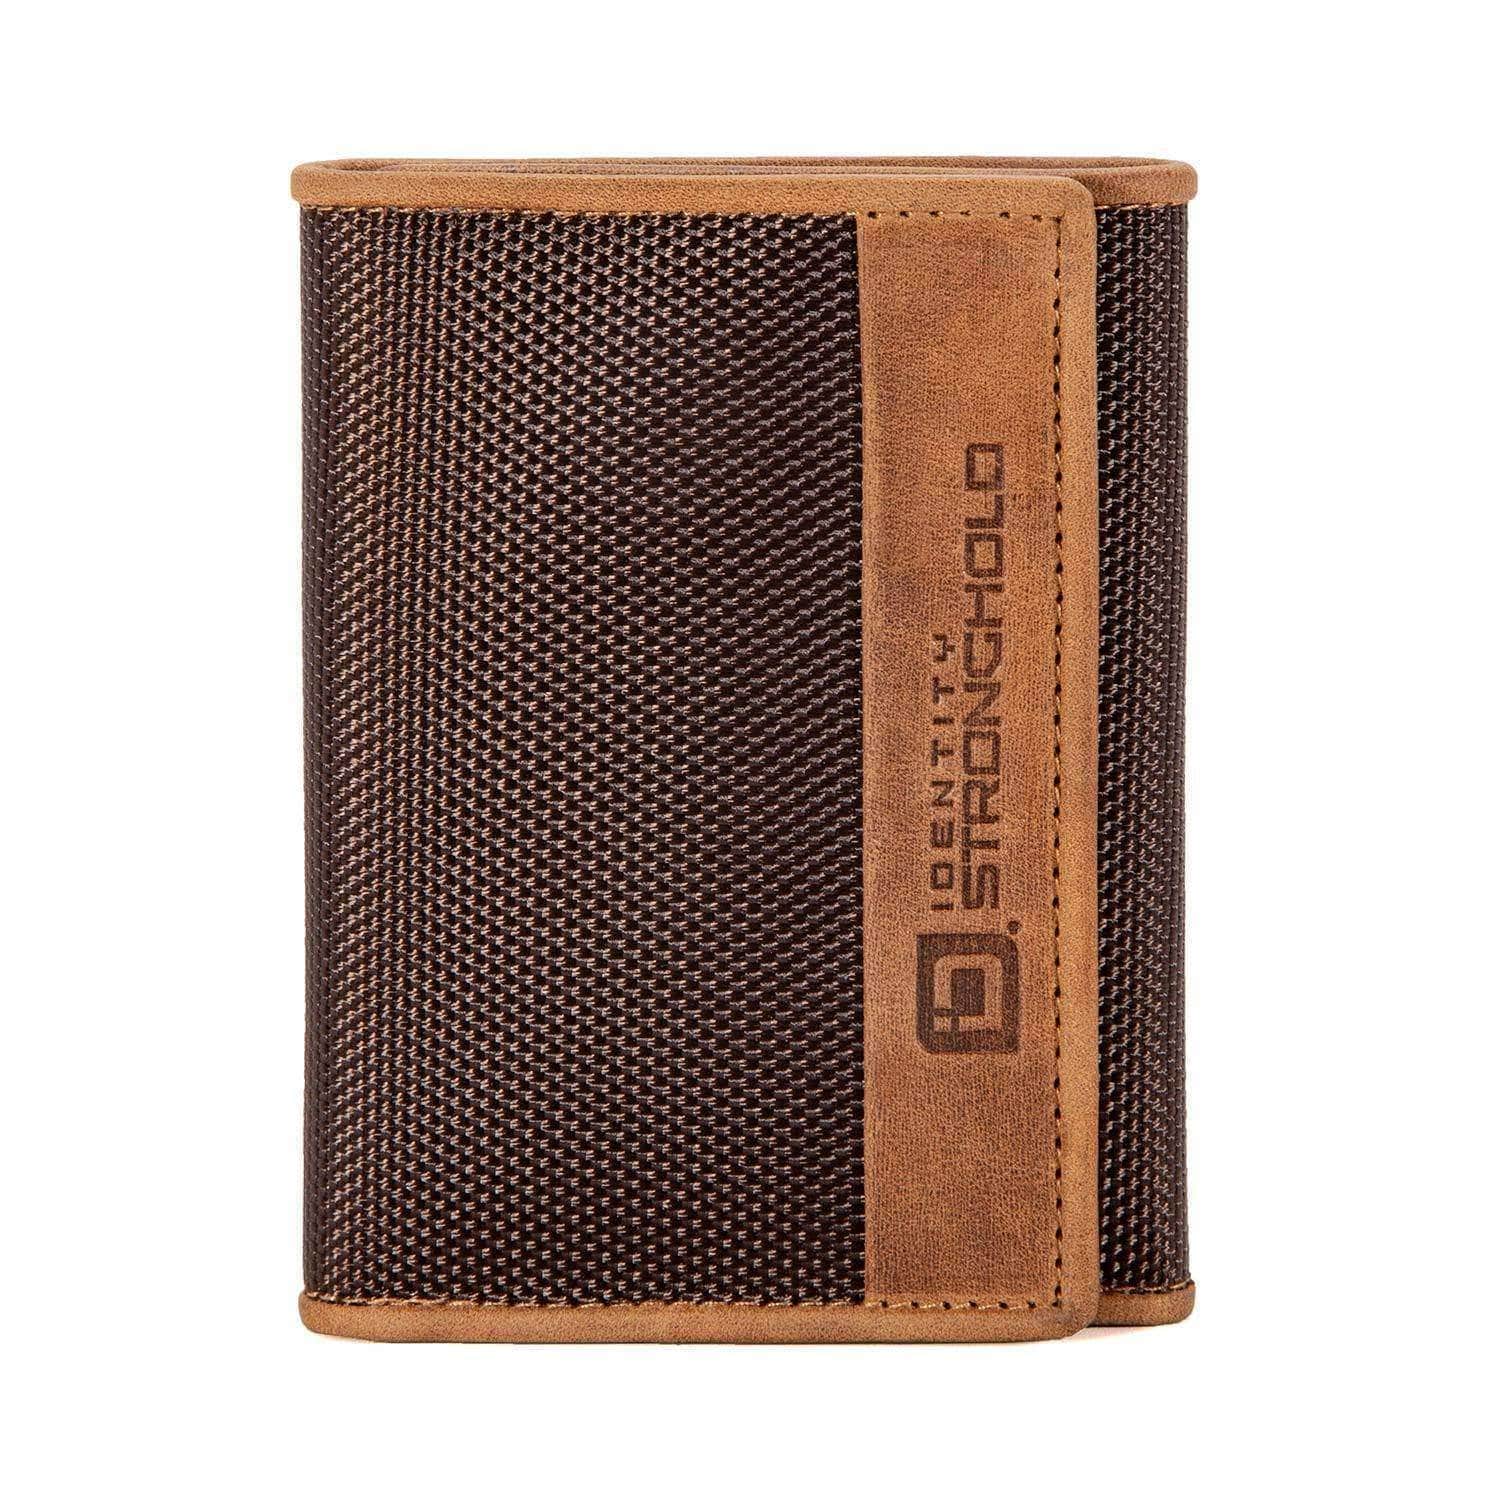 ID Stronghold Men's Wallet Brown Mens Slim RFID Trifold Wallet with ID in Leather and Nylon